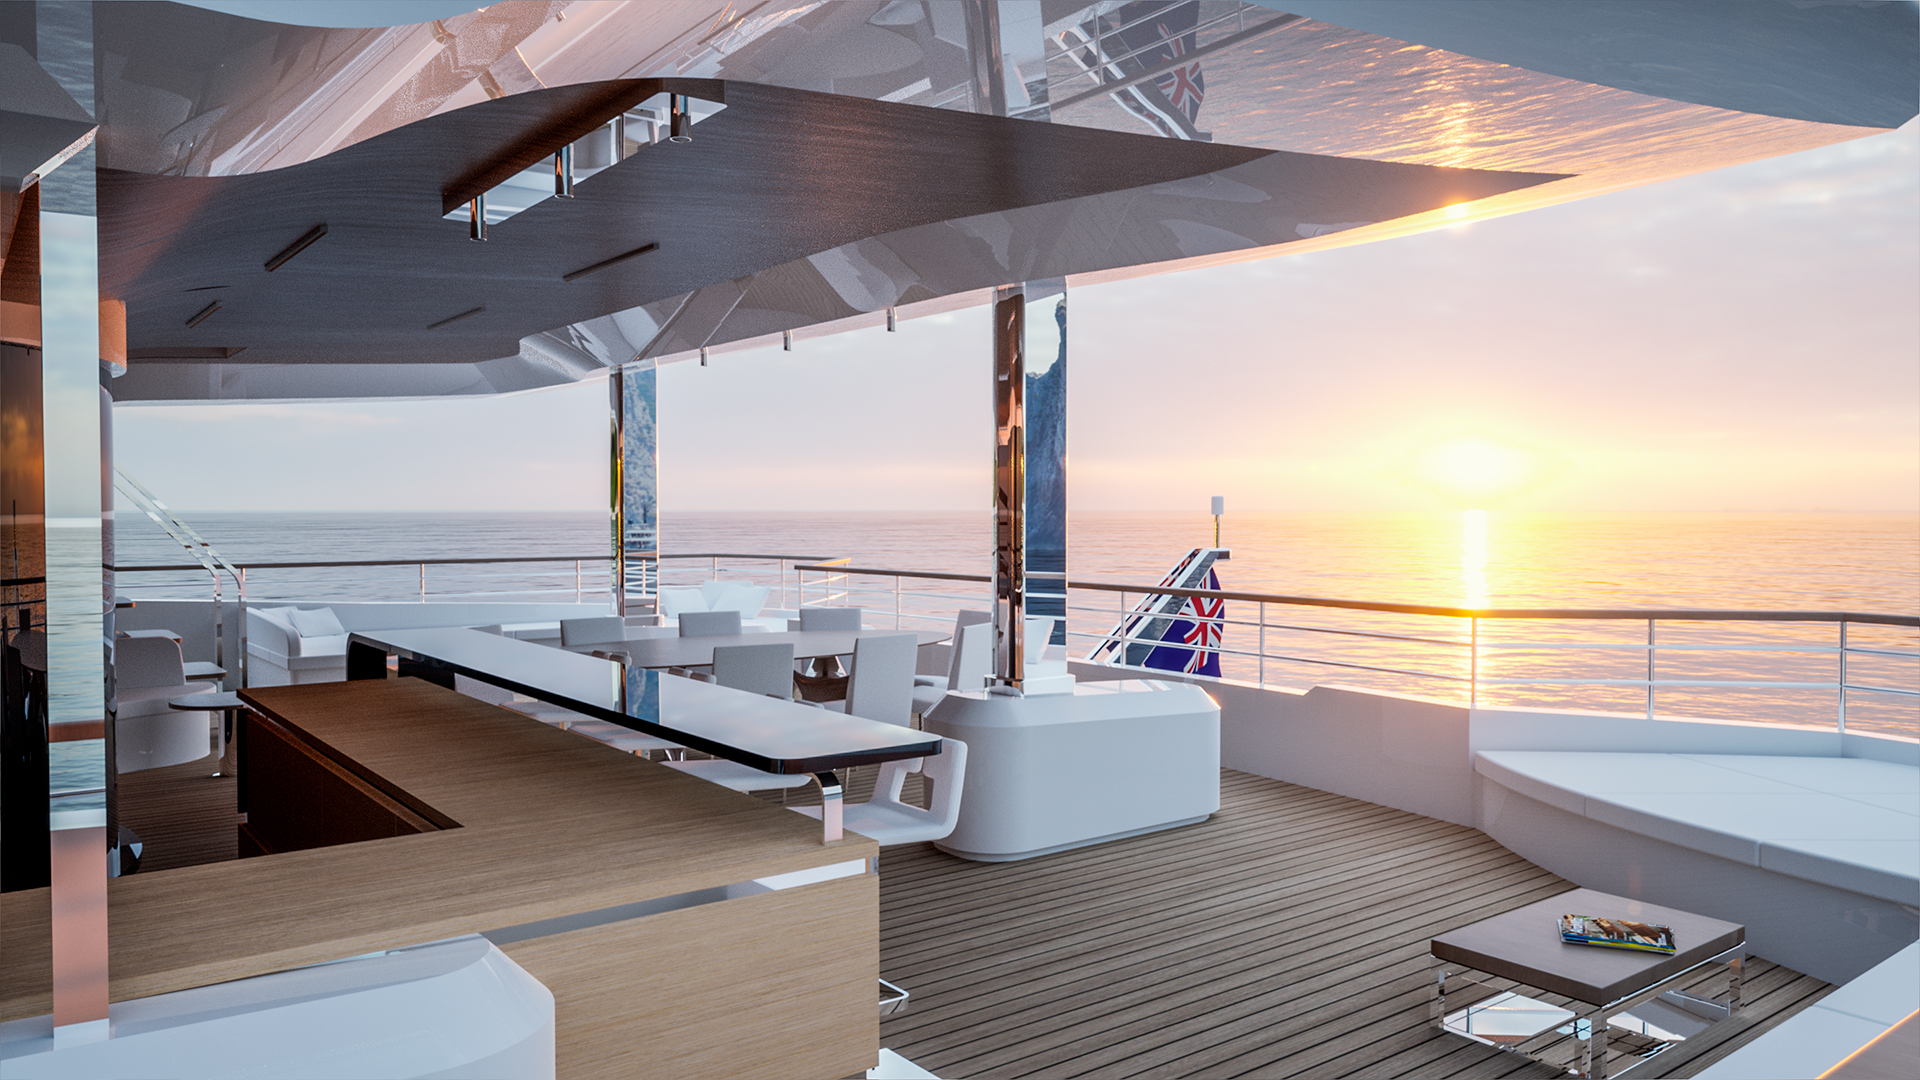 Outdoor terrace of a yacht with the sunset in the background